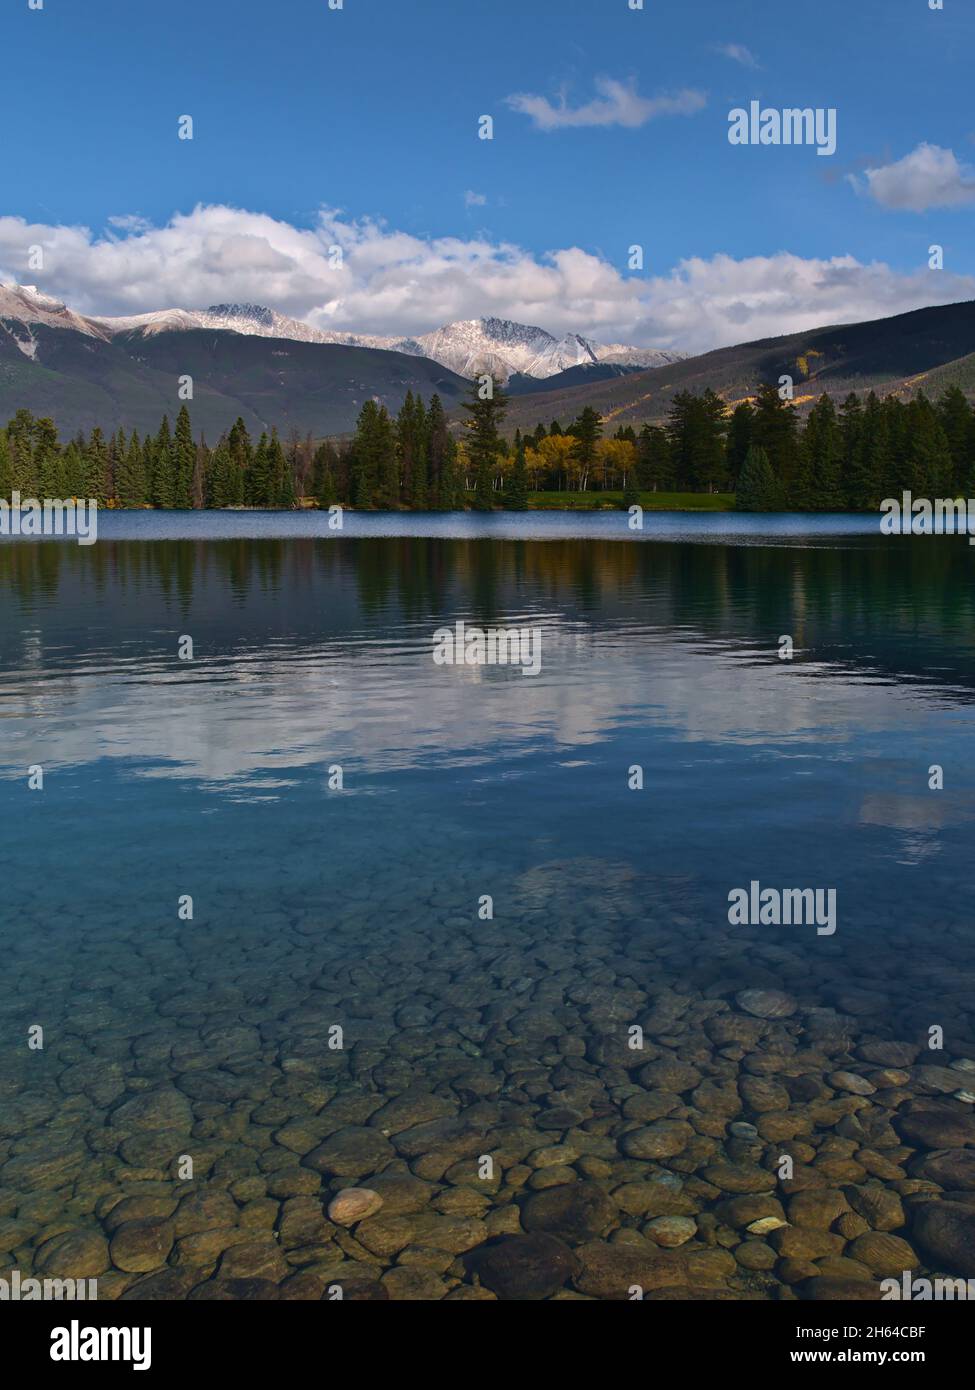 Stunning portrait view of beautiful Lake Beauvert in Jasper, Alberta, Canada in the Rocky Mountains with illuminated round stones on the shore. Stock Photo